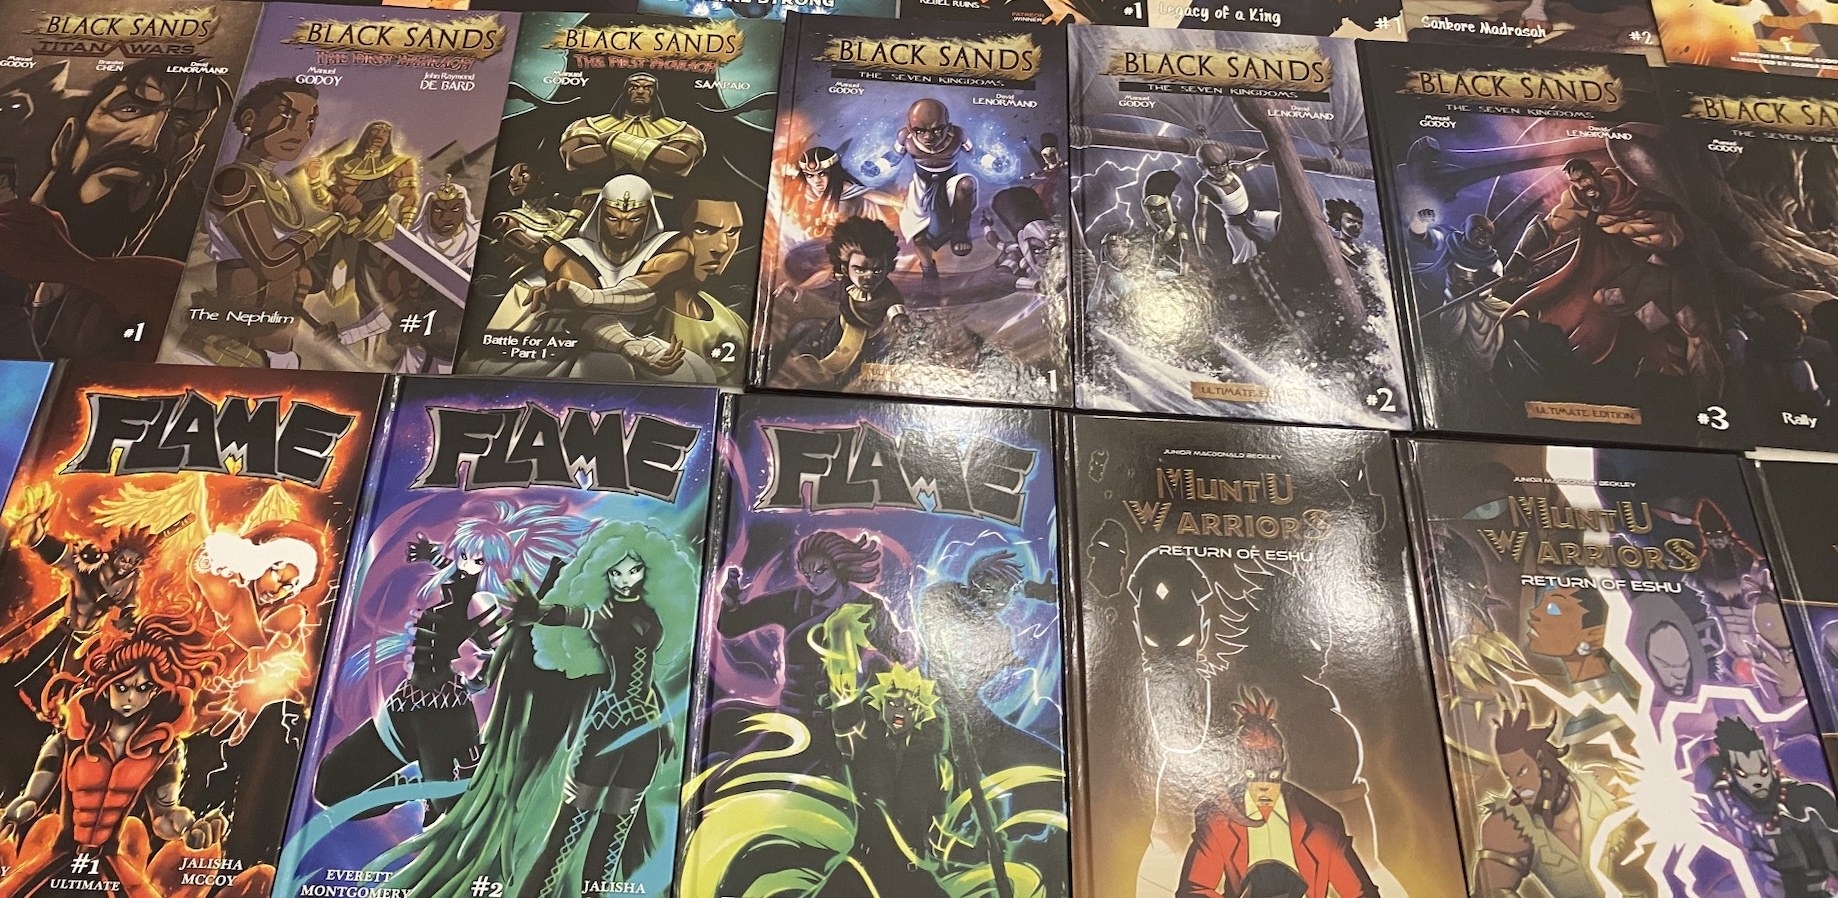 a collection of Black Sands comics